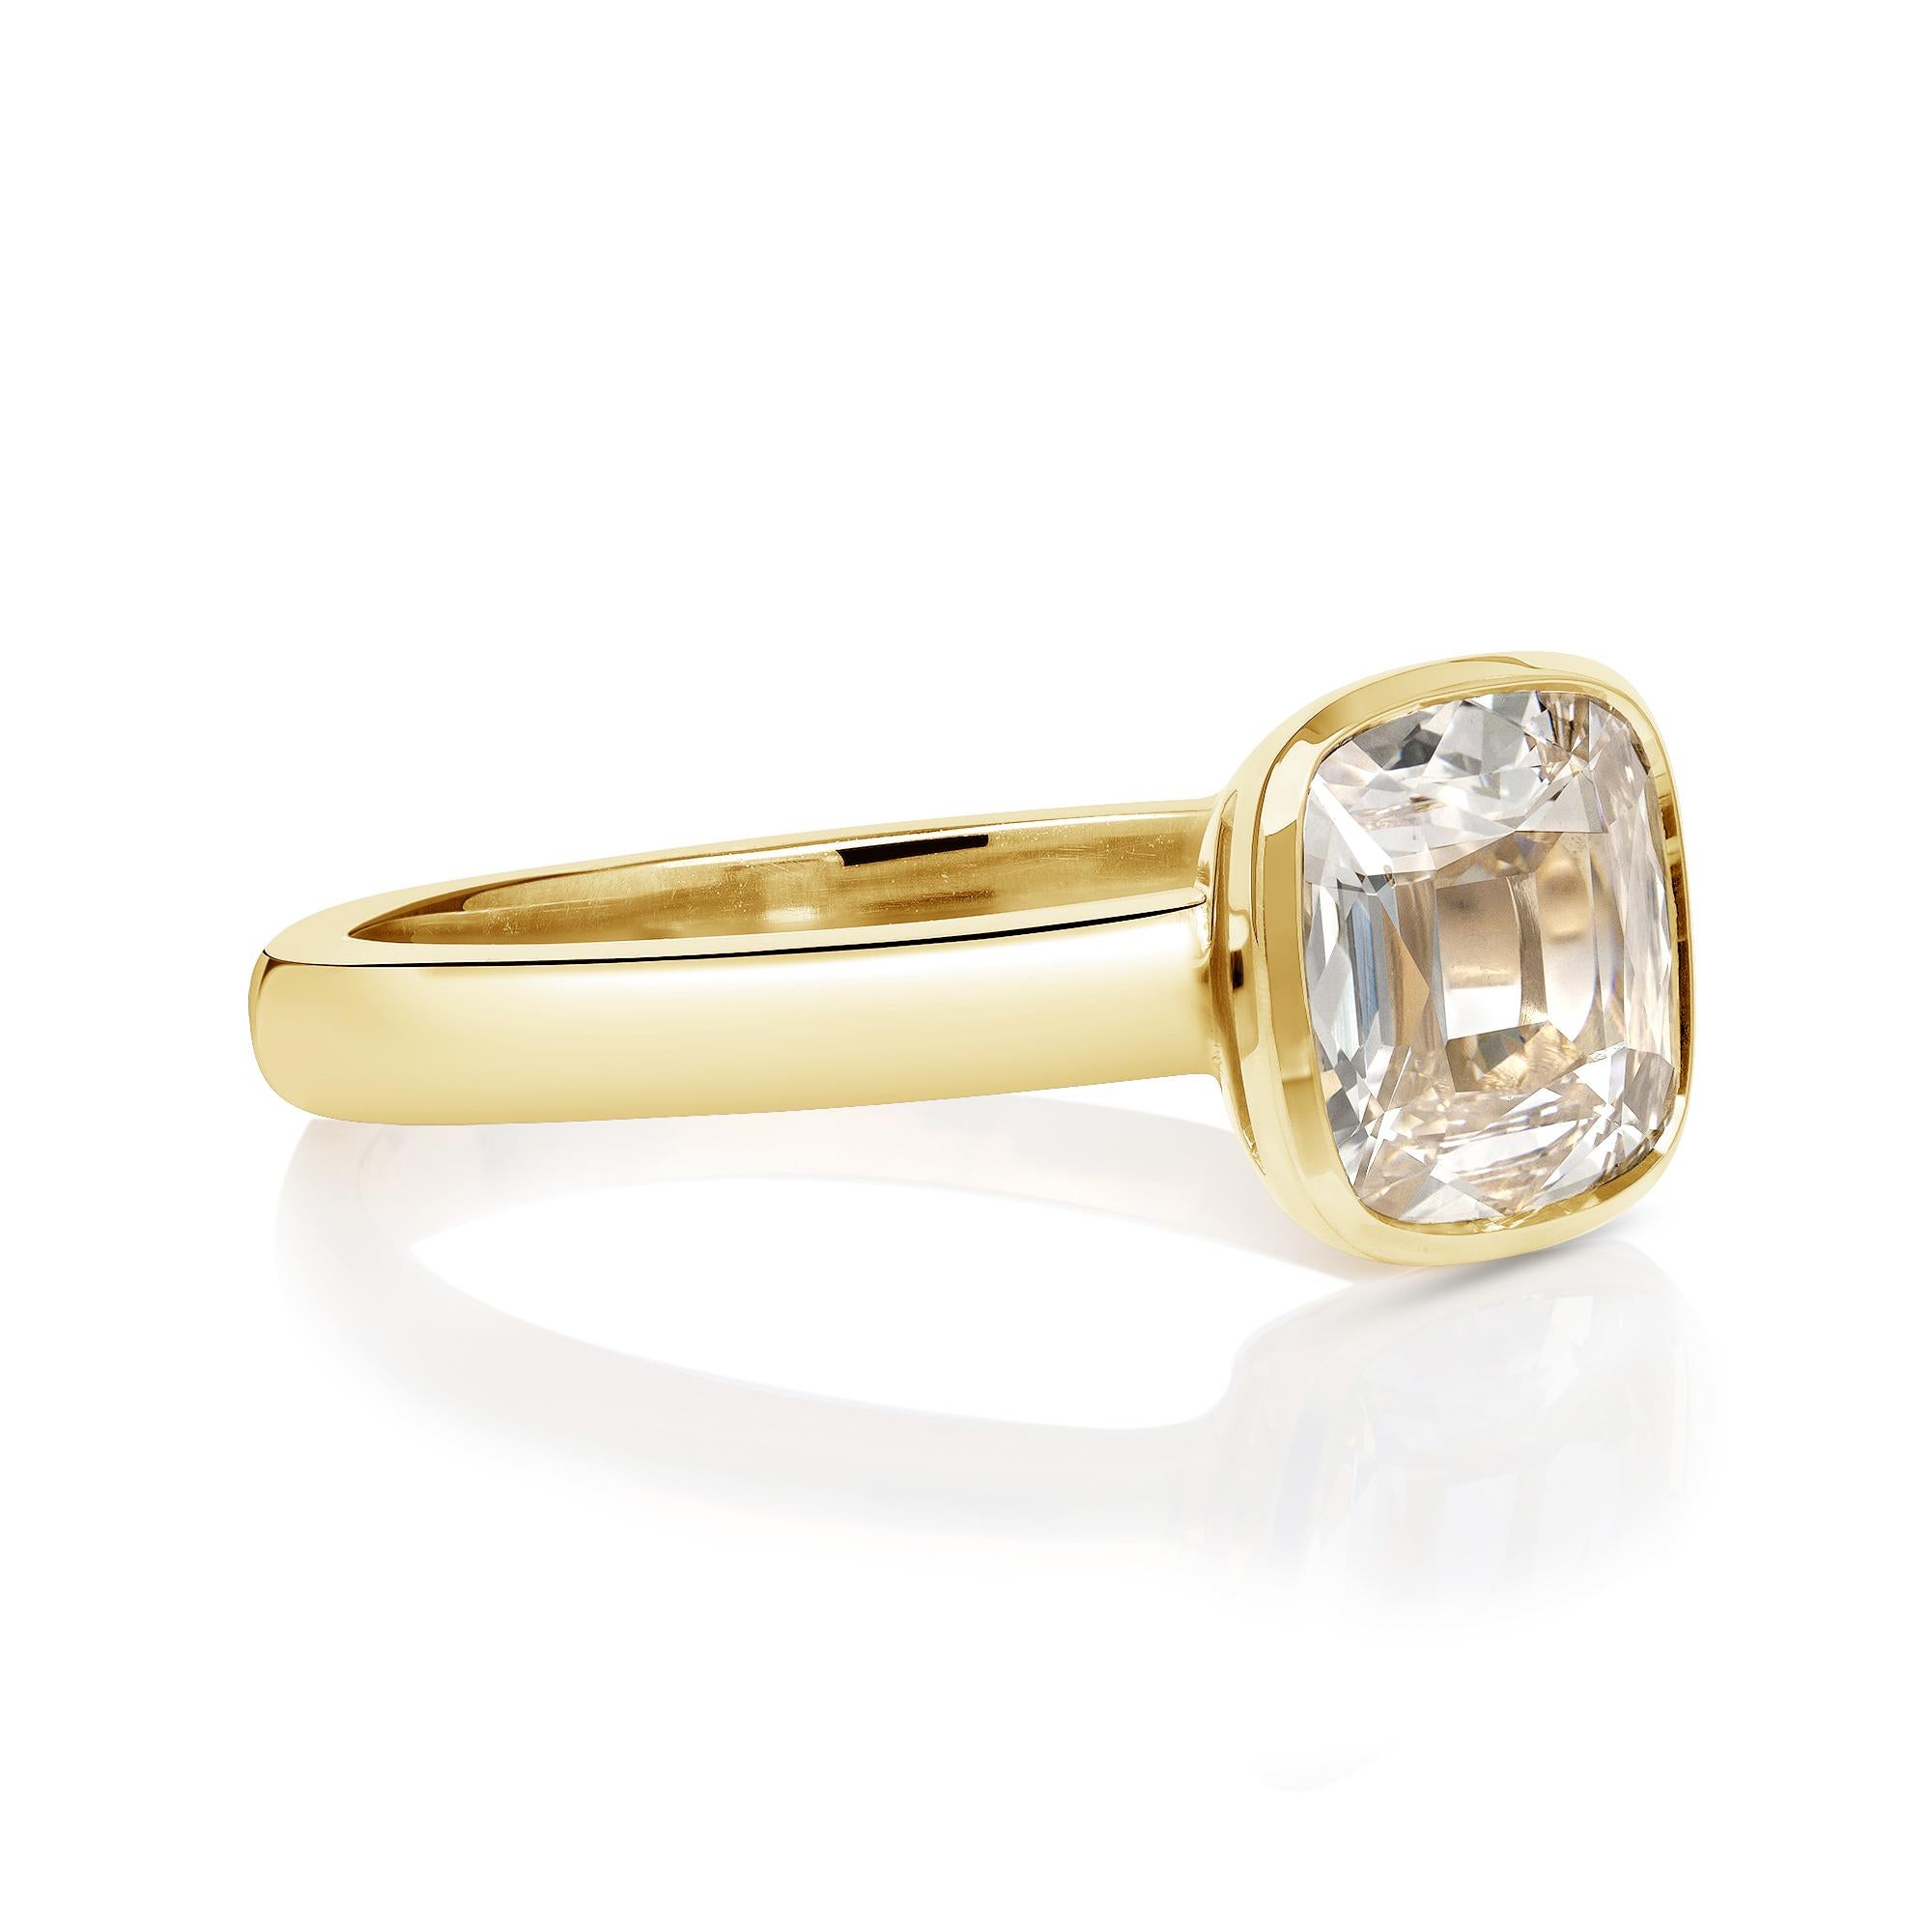 1.21ct M-Faint Brown/VS2 GIA certified antique Cushion cut diamond bezel set in a handcrafted 18K yellow gold mounting.